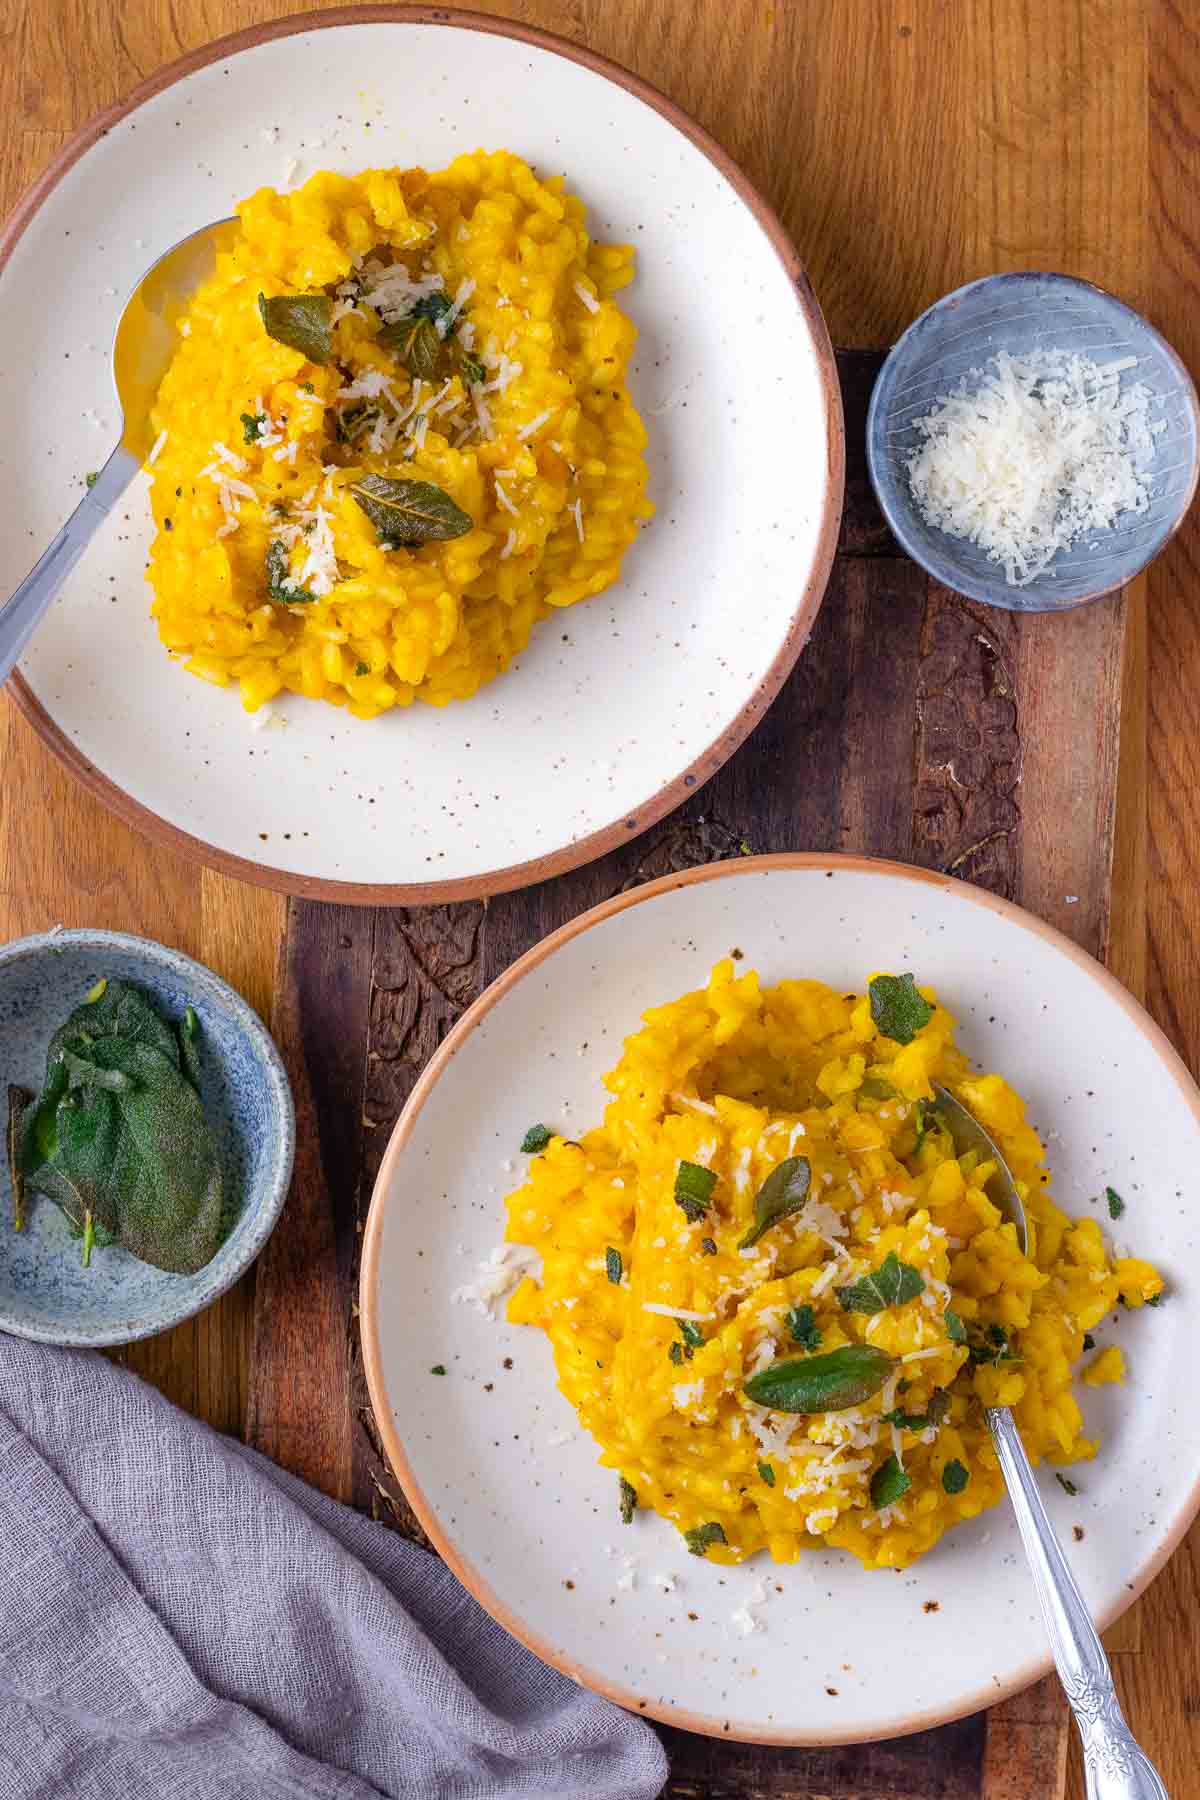 A bird's eye shot of two plates of creamy pumpkin risotto, garnished with sage. There is some shredded cheese in a bowl next to the top plate.